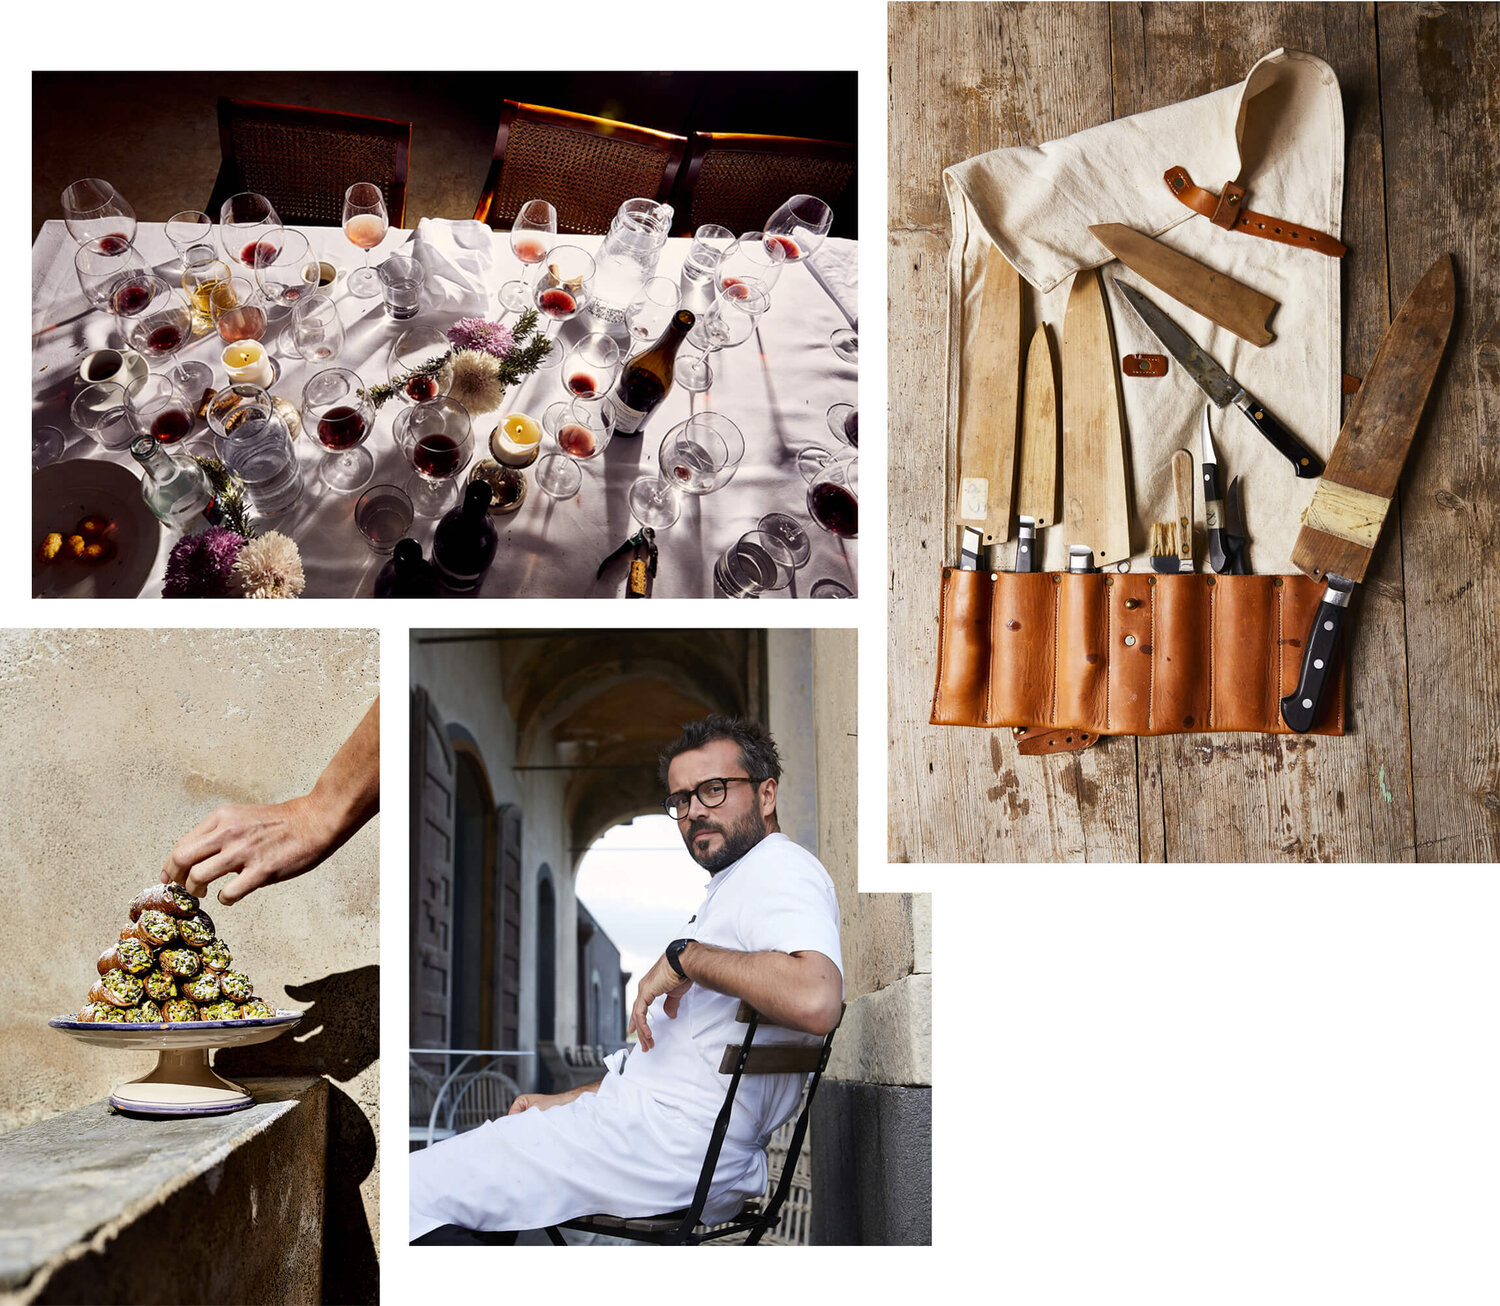 Collage of pictures showing a chef relaxing in whites; a set of well-used knife set in leather holder and a table with many wine glasses on a table top after use.